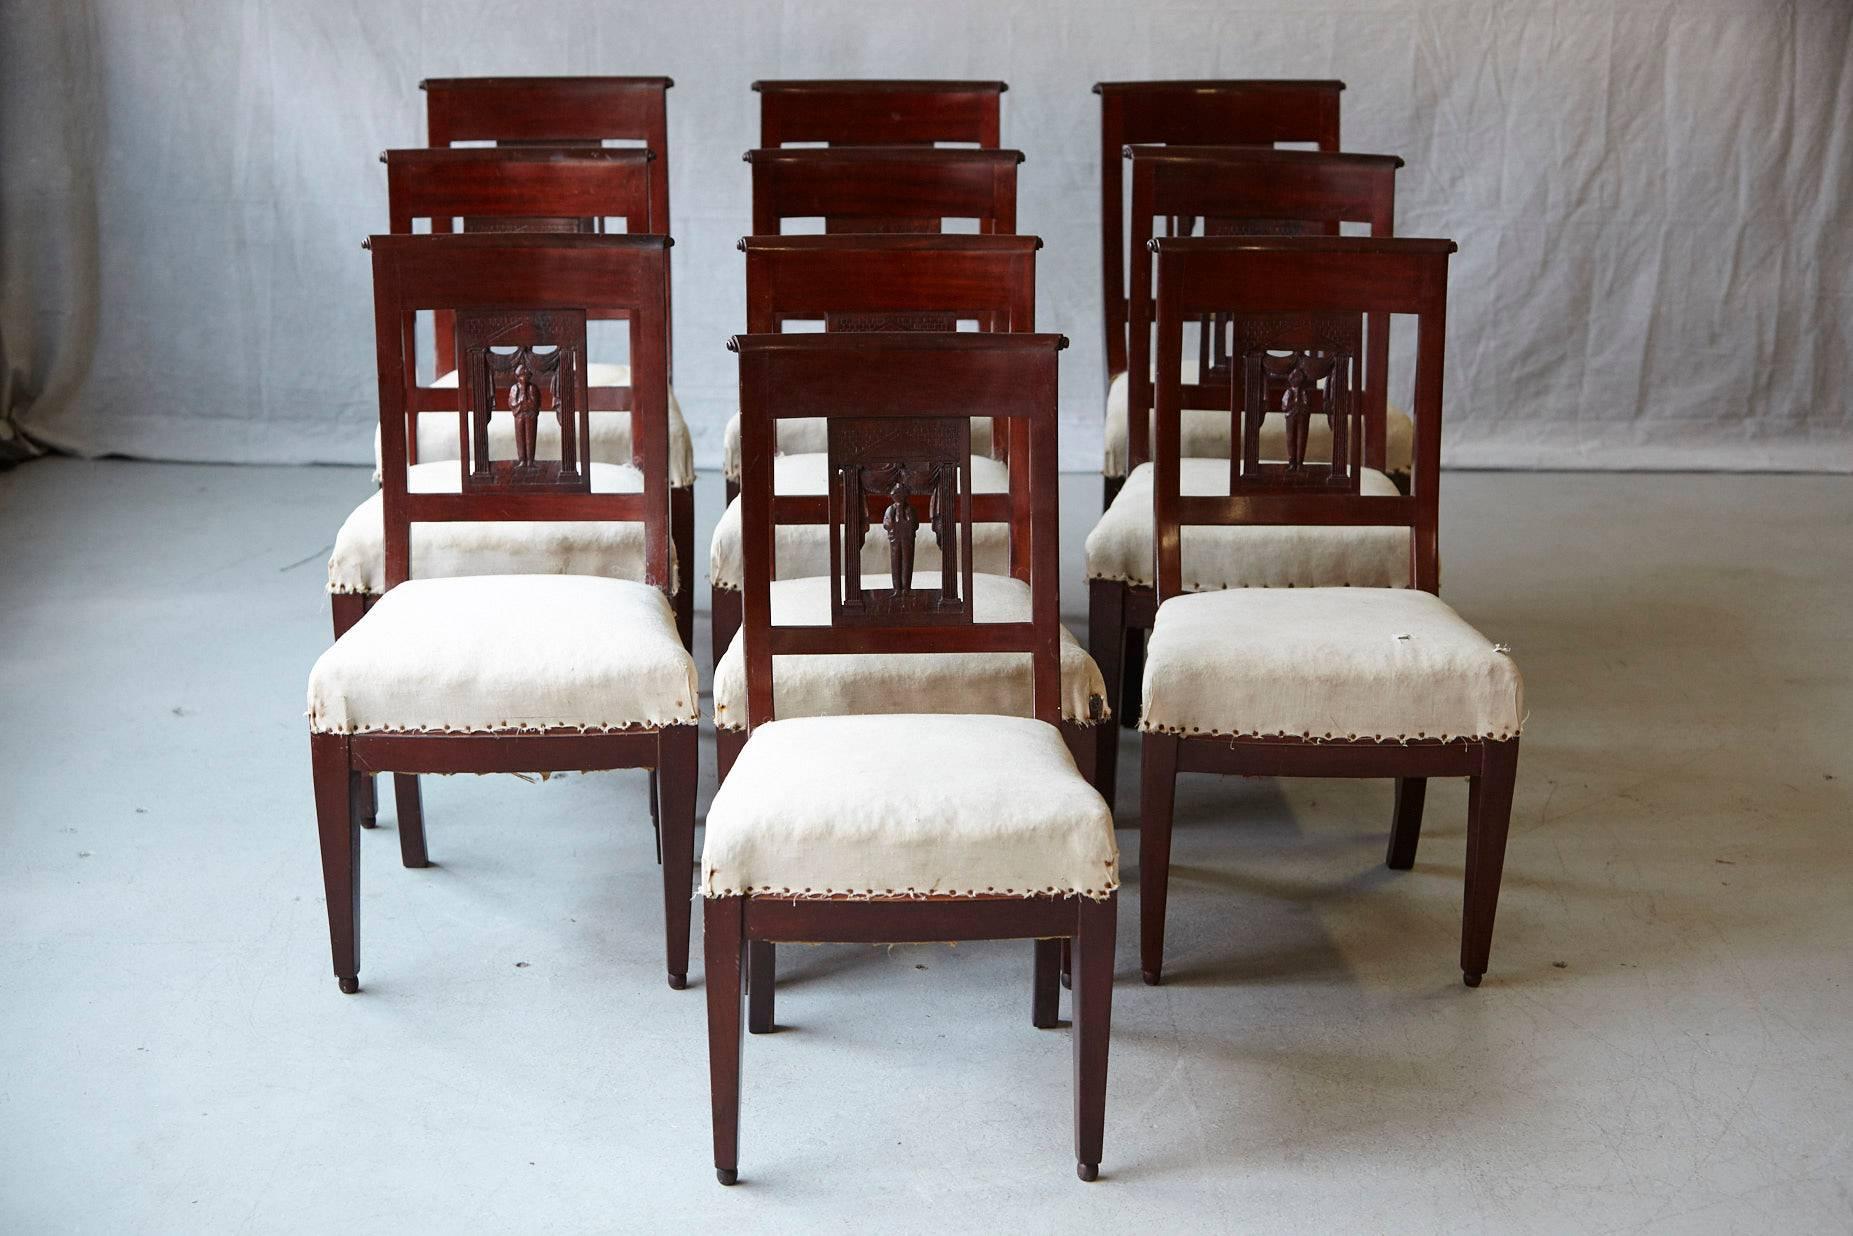 Beautiful set of ten antique mahogany dining chairs with a carved back depicting a figure beneath draped curtain, presently covered in sand colored muslin.
The chairs have a distressed appearance, the muslin on some of the chairs has stains, on has